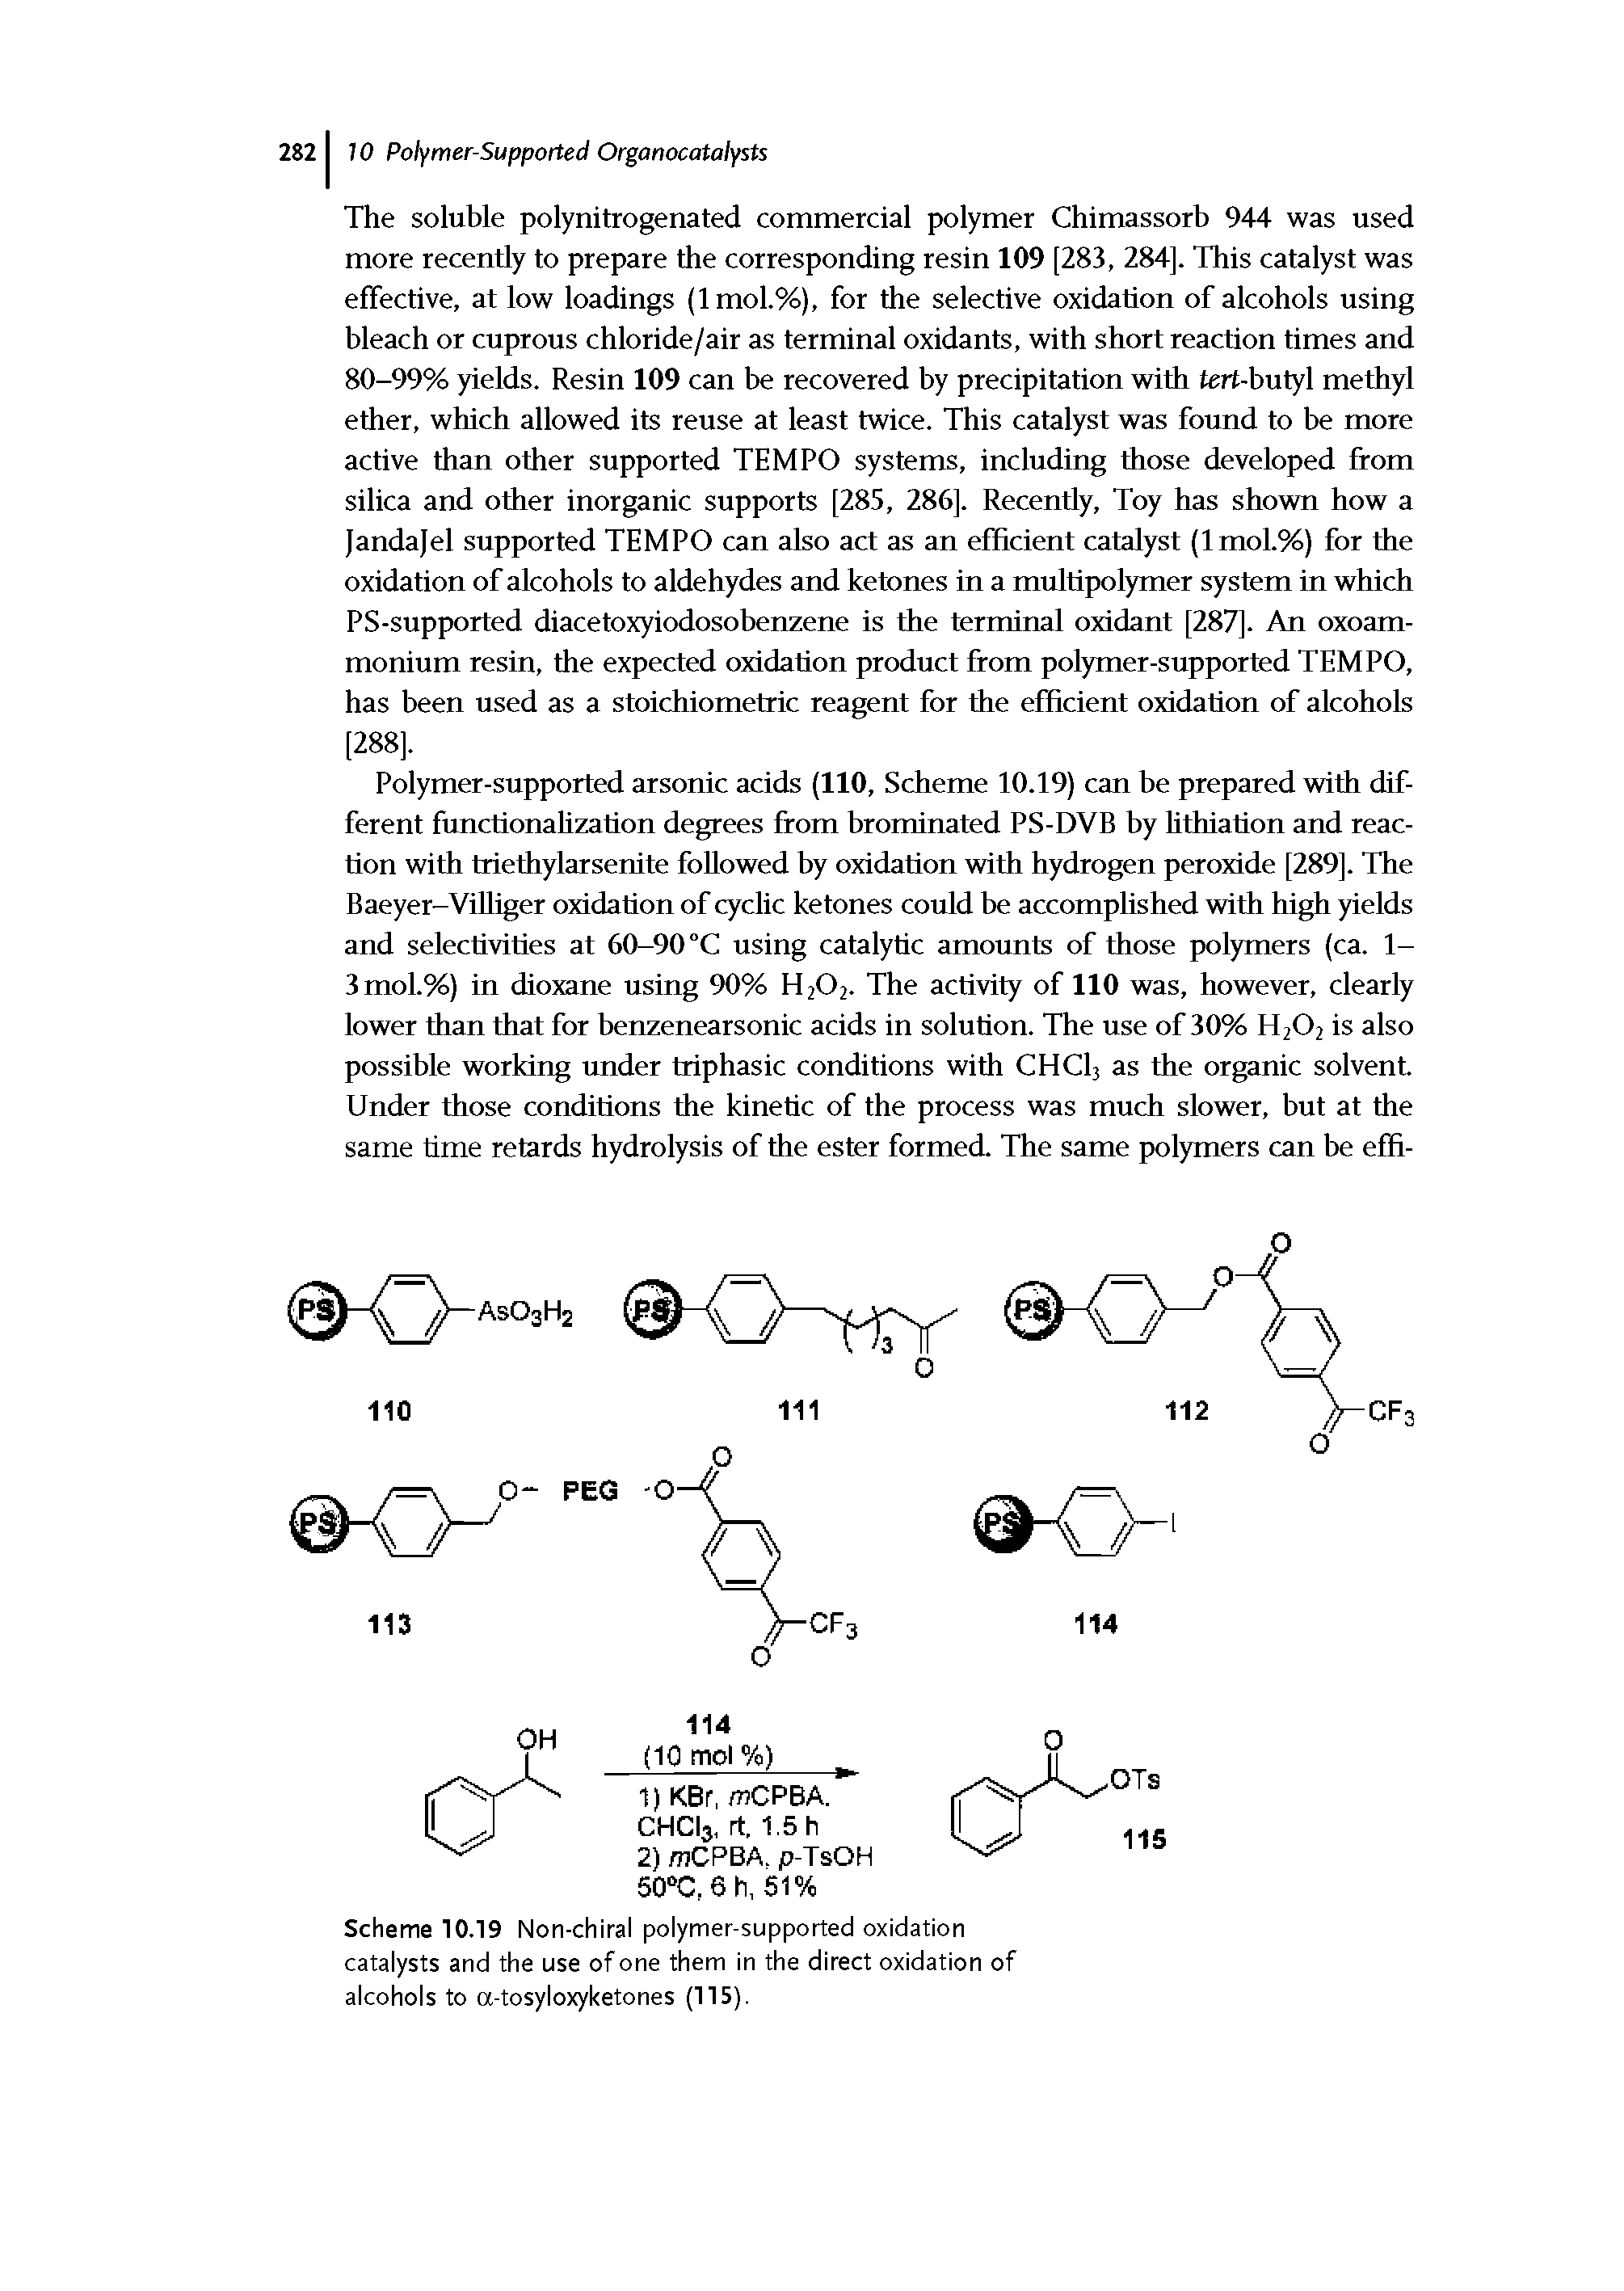 Scheme 10.19 Non-chiral polymer-supported oxidation catalysts and the use of one them in the direct oxidation of alcohols to a-tosyloxyketones (115).